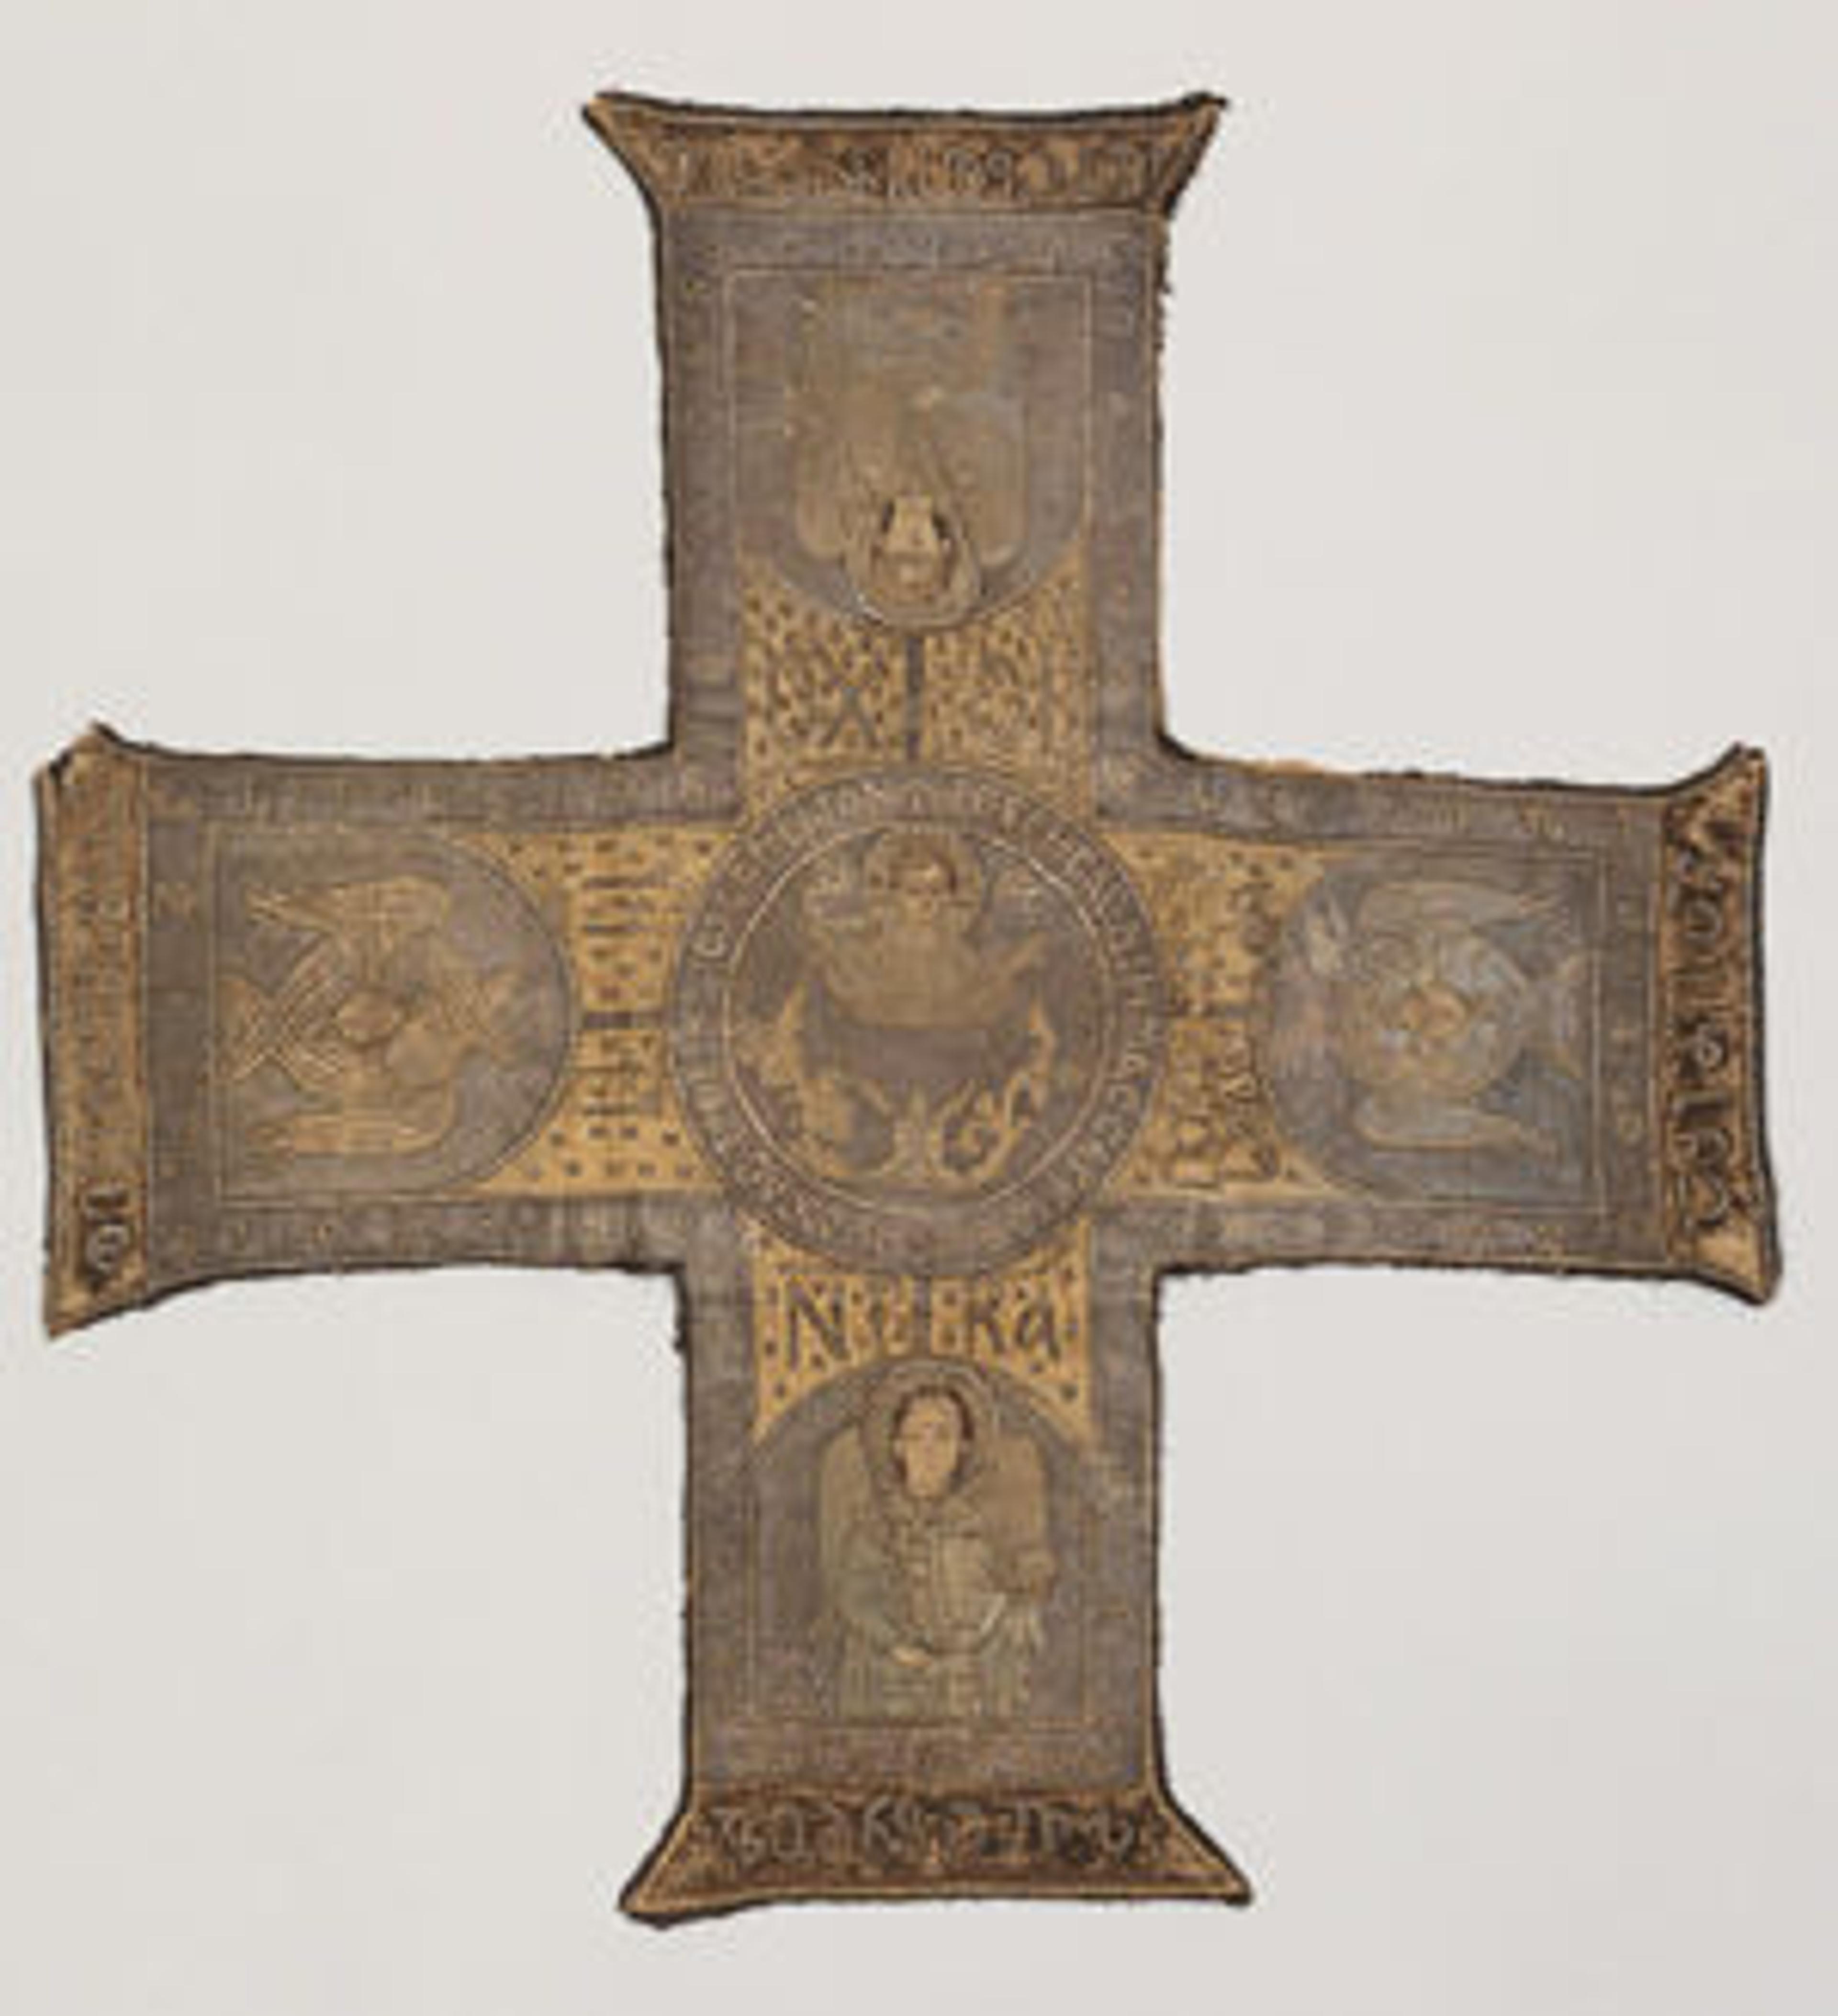 Left: Chalice cover, late 15th century. Georgian, Abkhasia. Silk and metal thread embroidery on a foundation of silk satin backed with linen plain weave; 16 3/4 x 17 in. (42.5 x 43.2 cm). The Metropolitan Museum of Art, New York, Gift of J. Pierpont Morgan, 1917 (17.190.128)